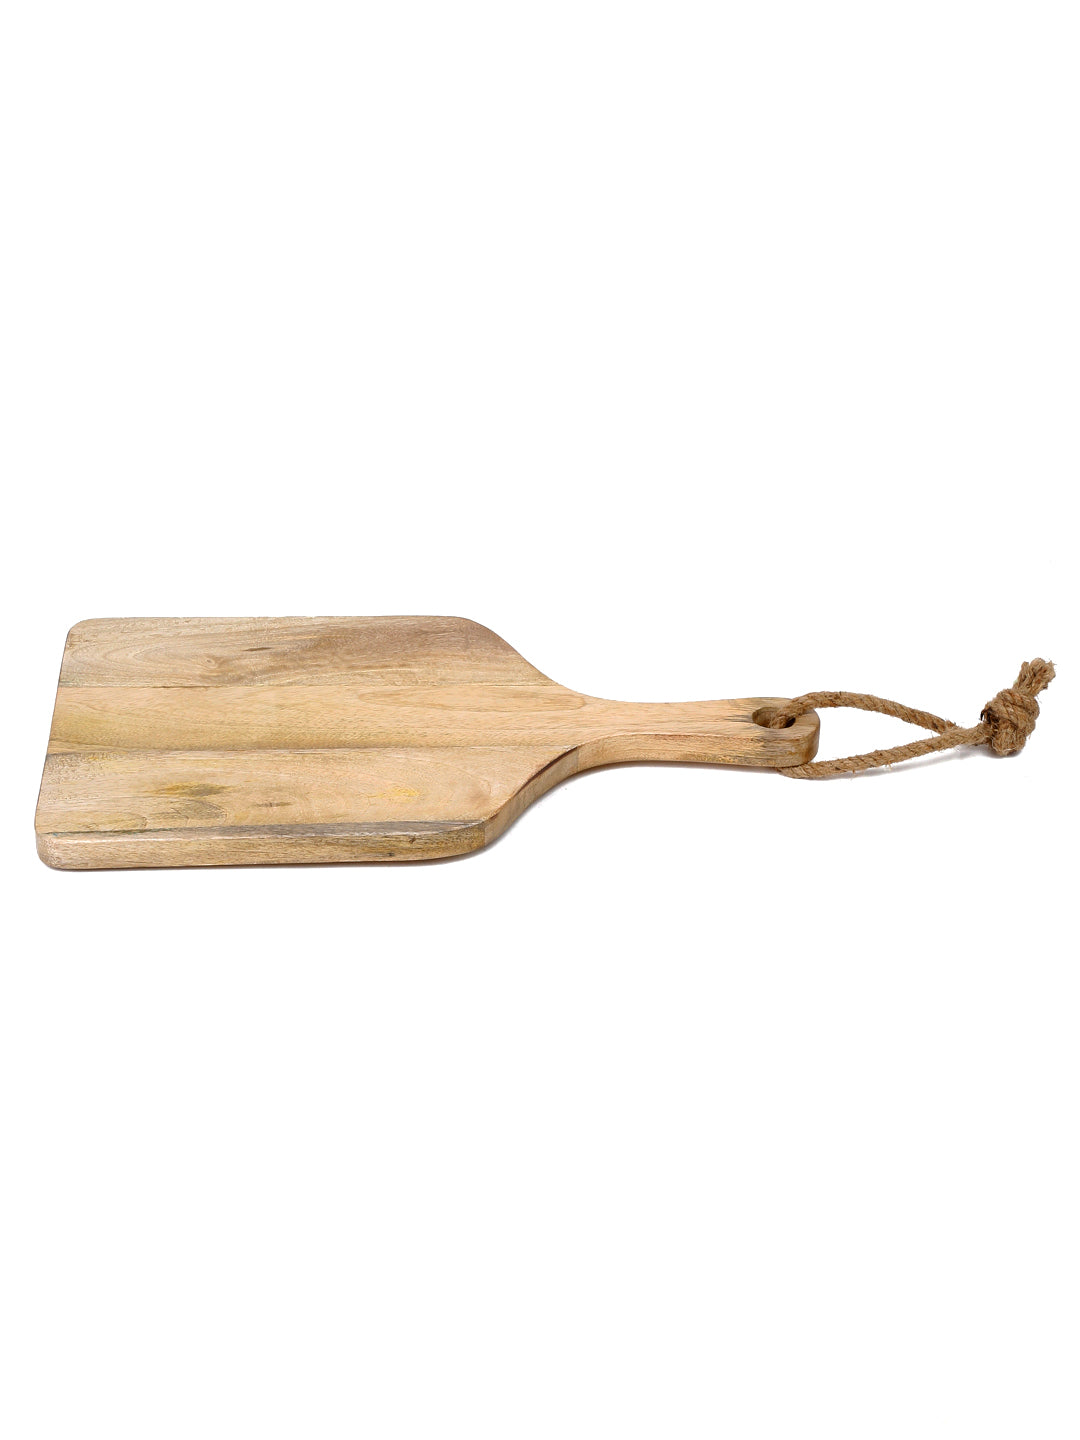 Stylish Wooden Chopping Board for Food Preparation